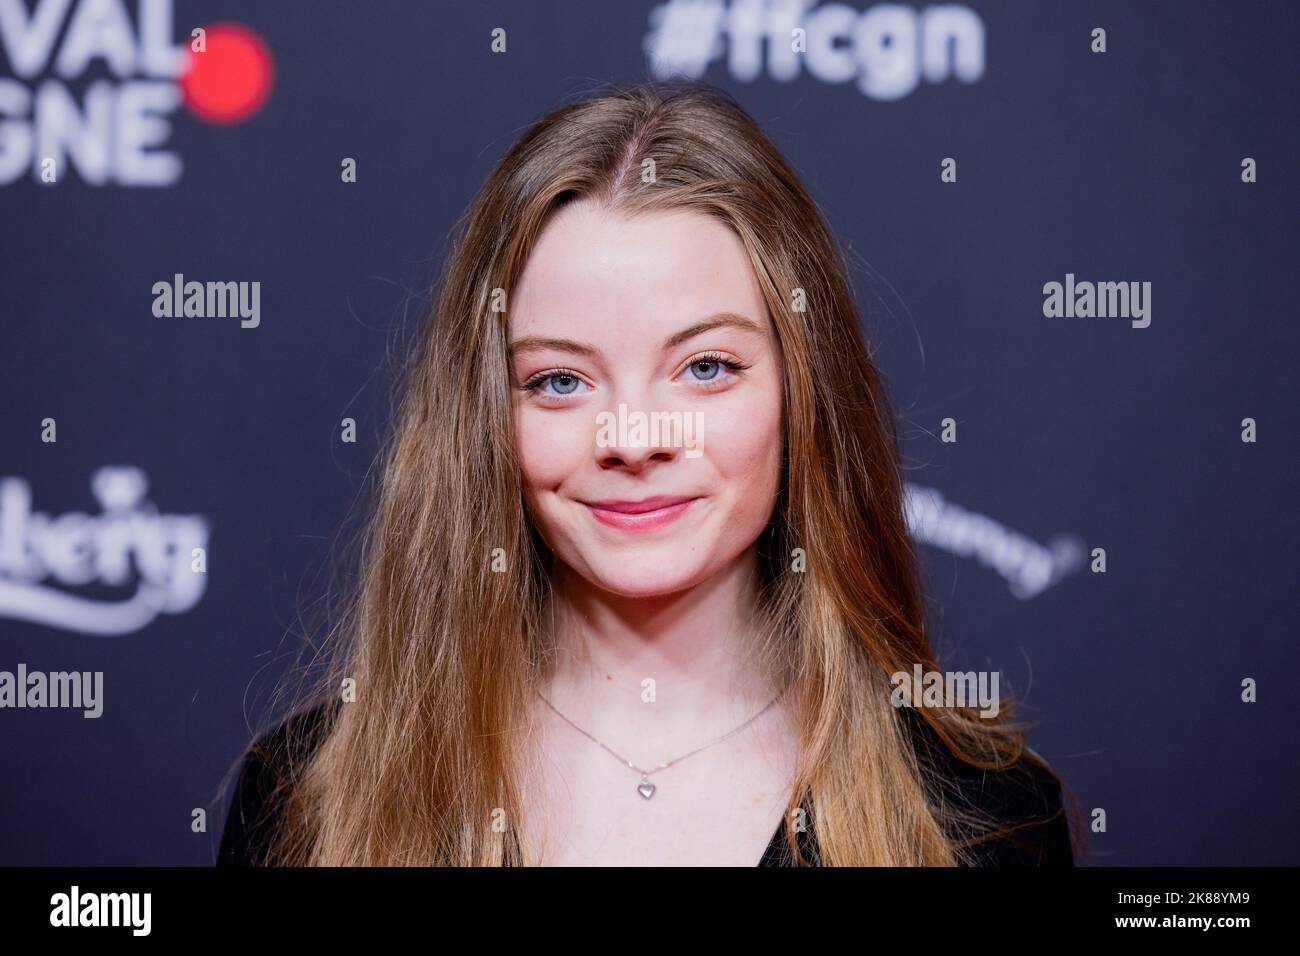 Cologne, Germany. 21st Oct, 2022. Charlotte Lorenzen, actress, arrives at the premiere of the Tatort episode 'Spur des Blutes' at Film Festival Cologne. The investigative team of the Cologne Tatort celebrates the 25th anniversary of service. Credit: Rolf Vennenbernd/dpa/Alamy Live News Stock Photo